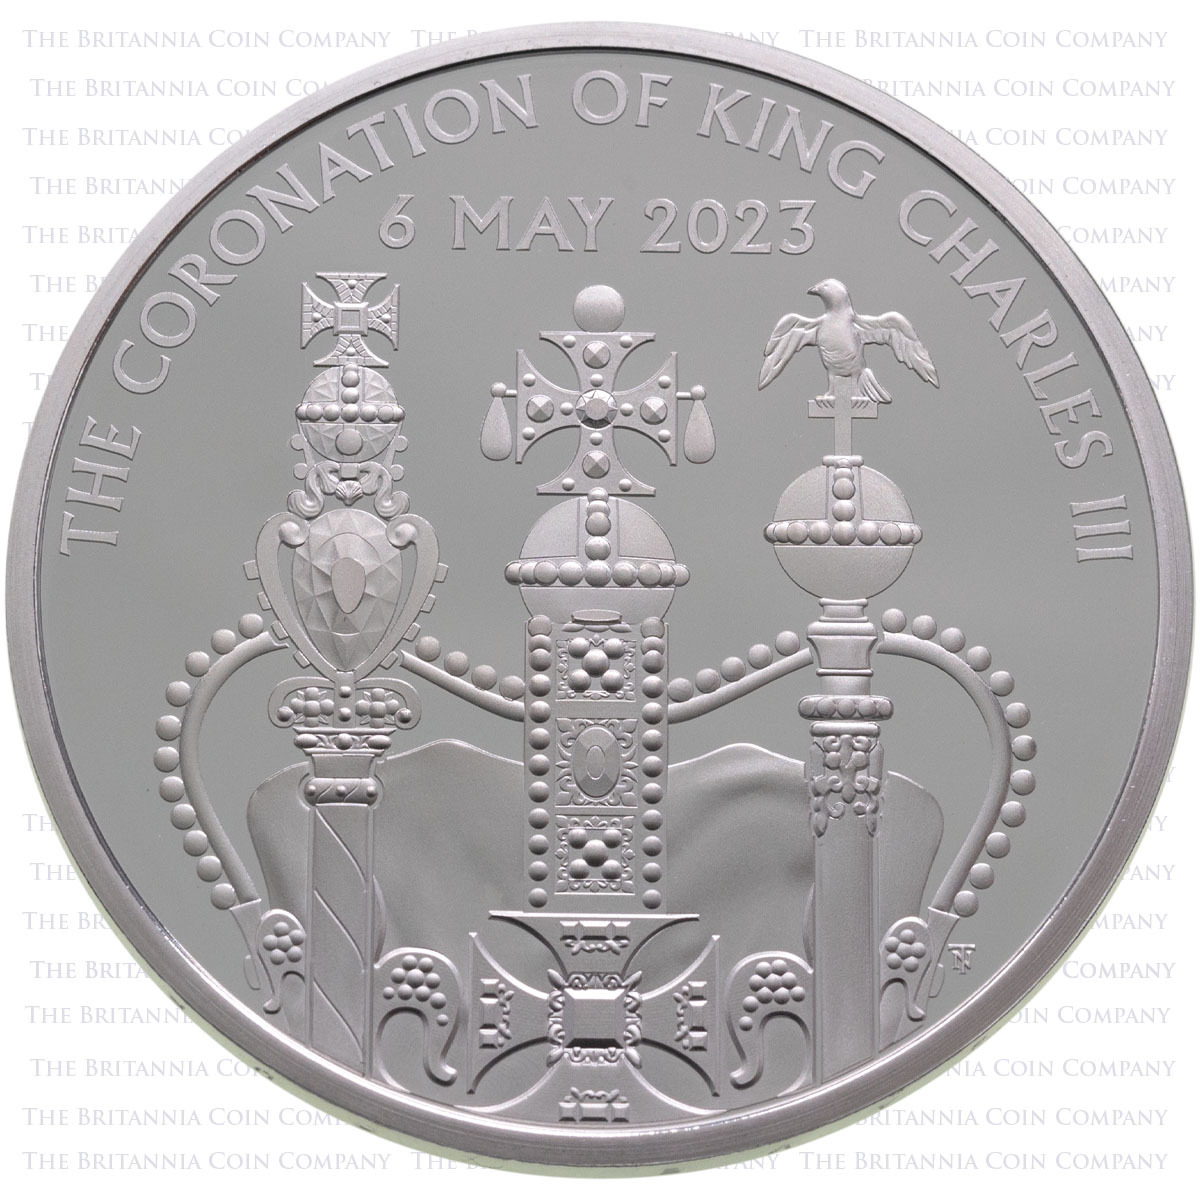 UK23KCSP 2023 King Charles III Coronation Five Pound Crown Silver Proof Coin Reverse